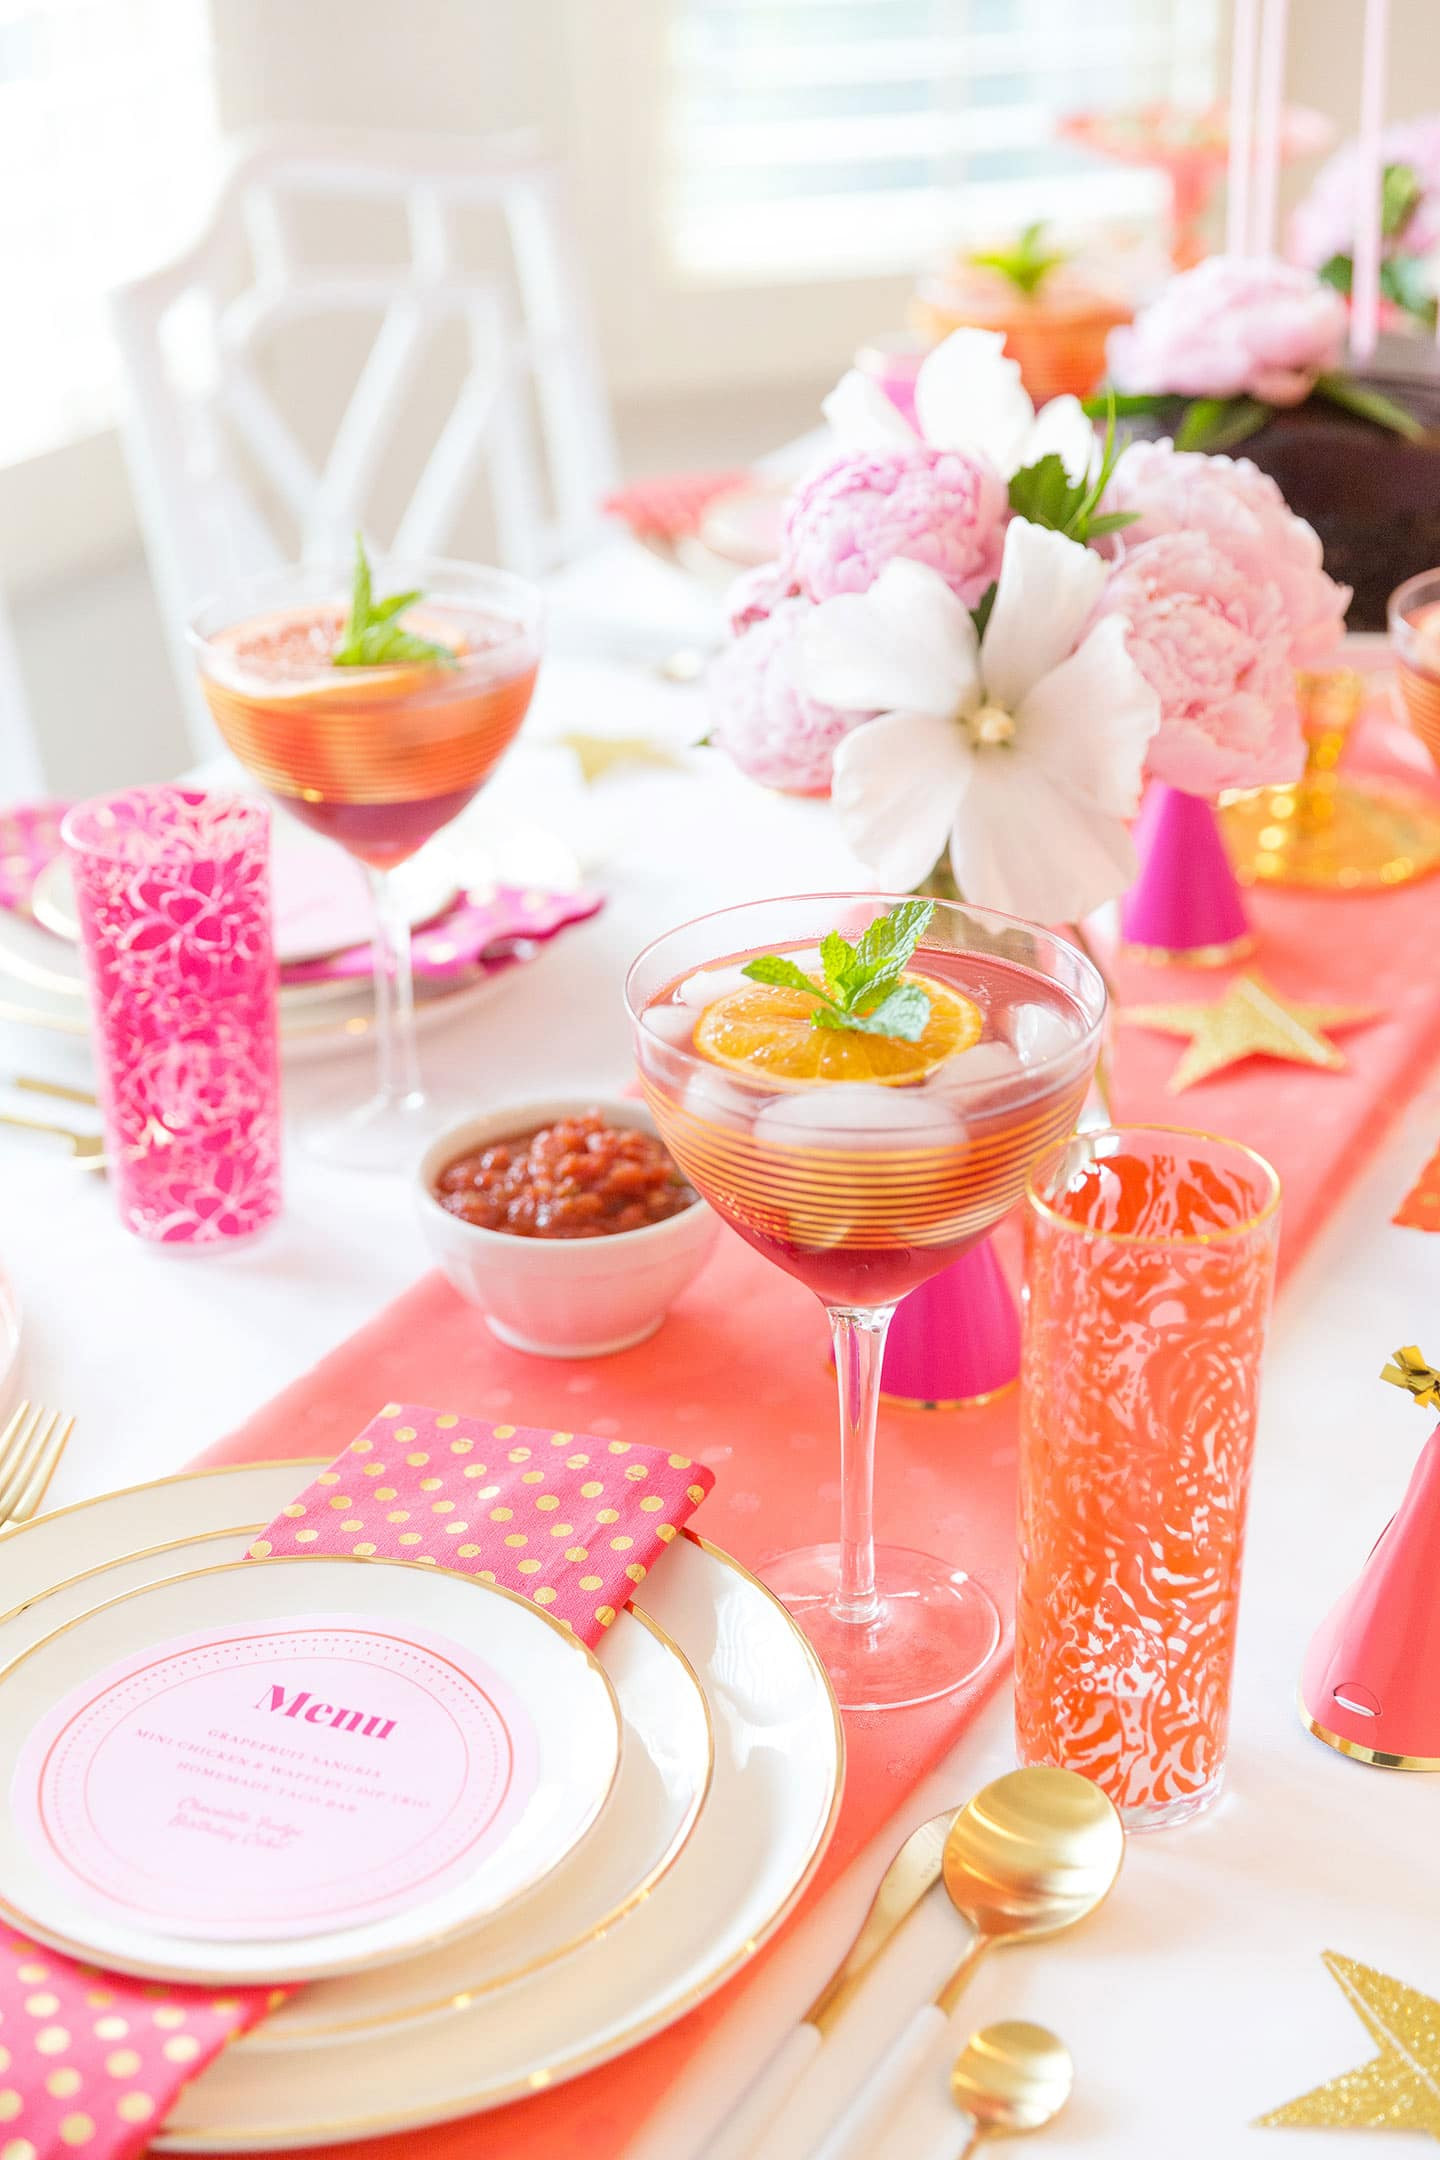 Unusual Birthday Party Ideas For Adults
 Creative Adult Birthday Party Ideas for the Girls